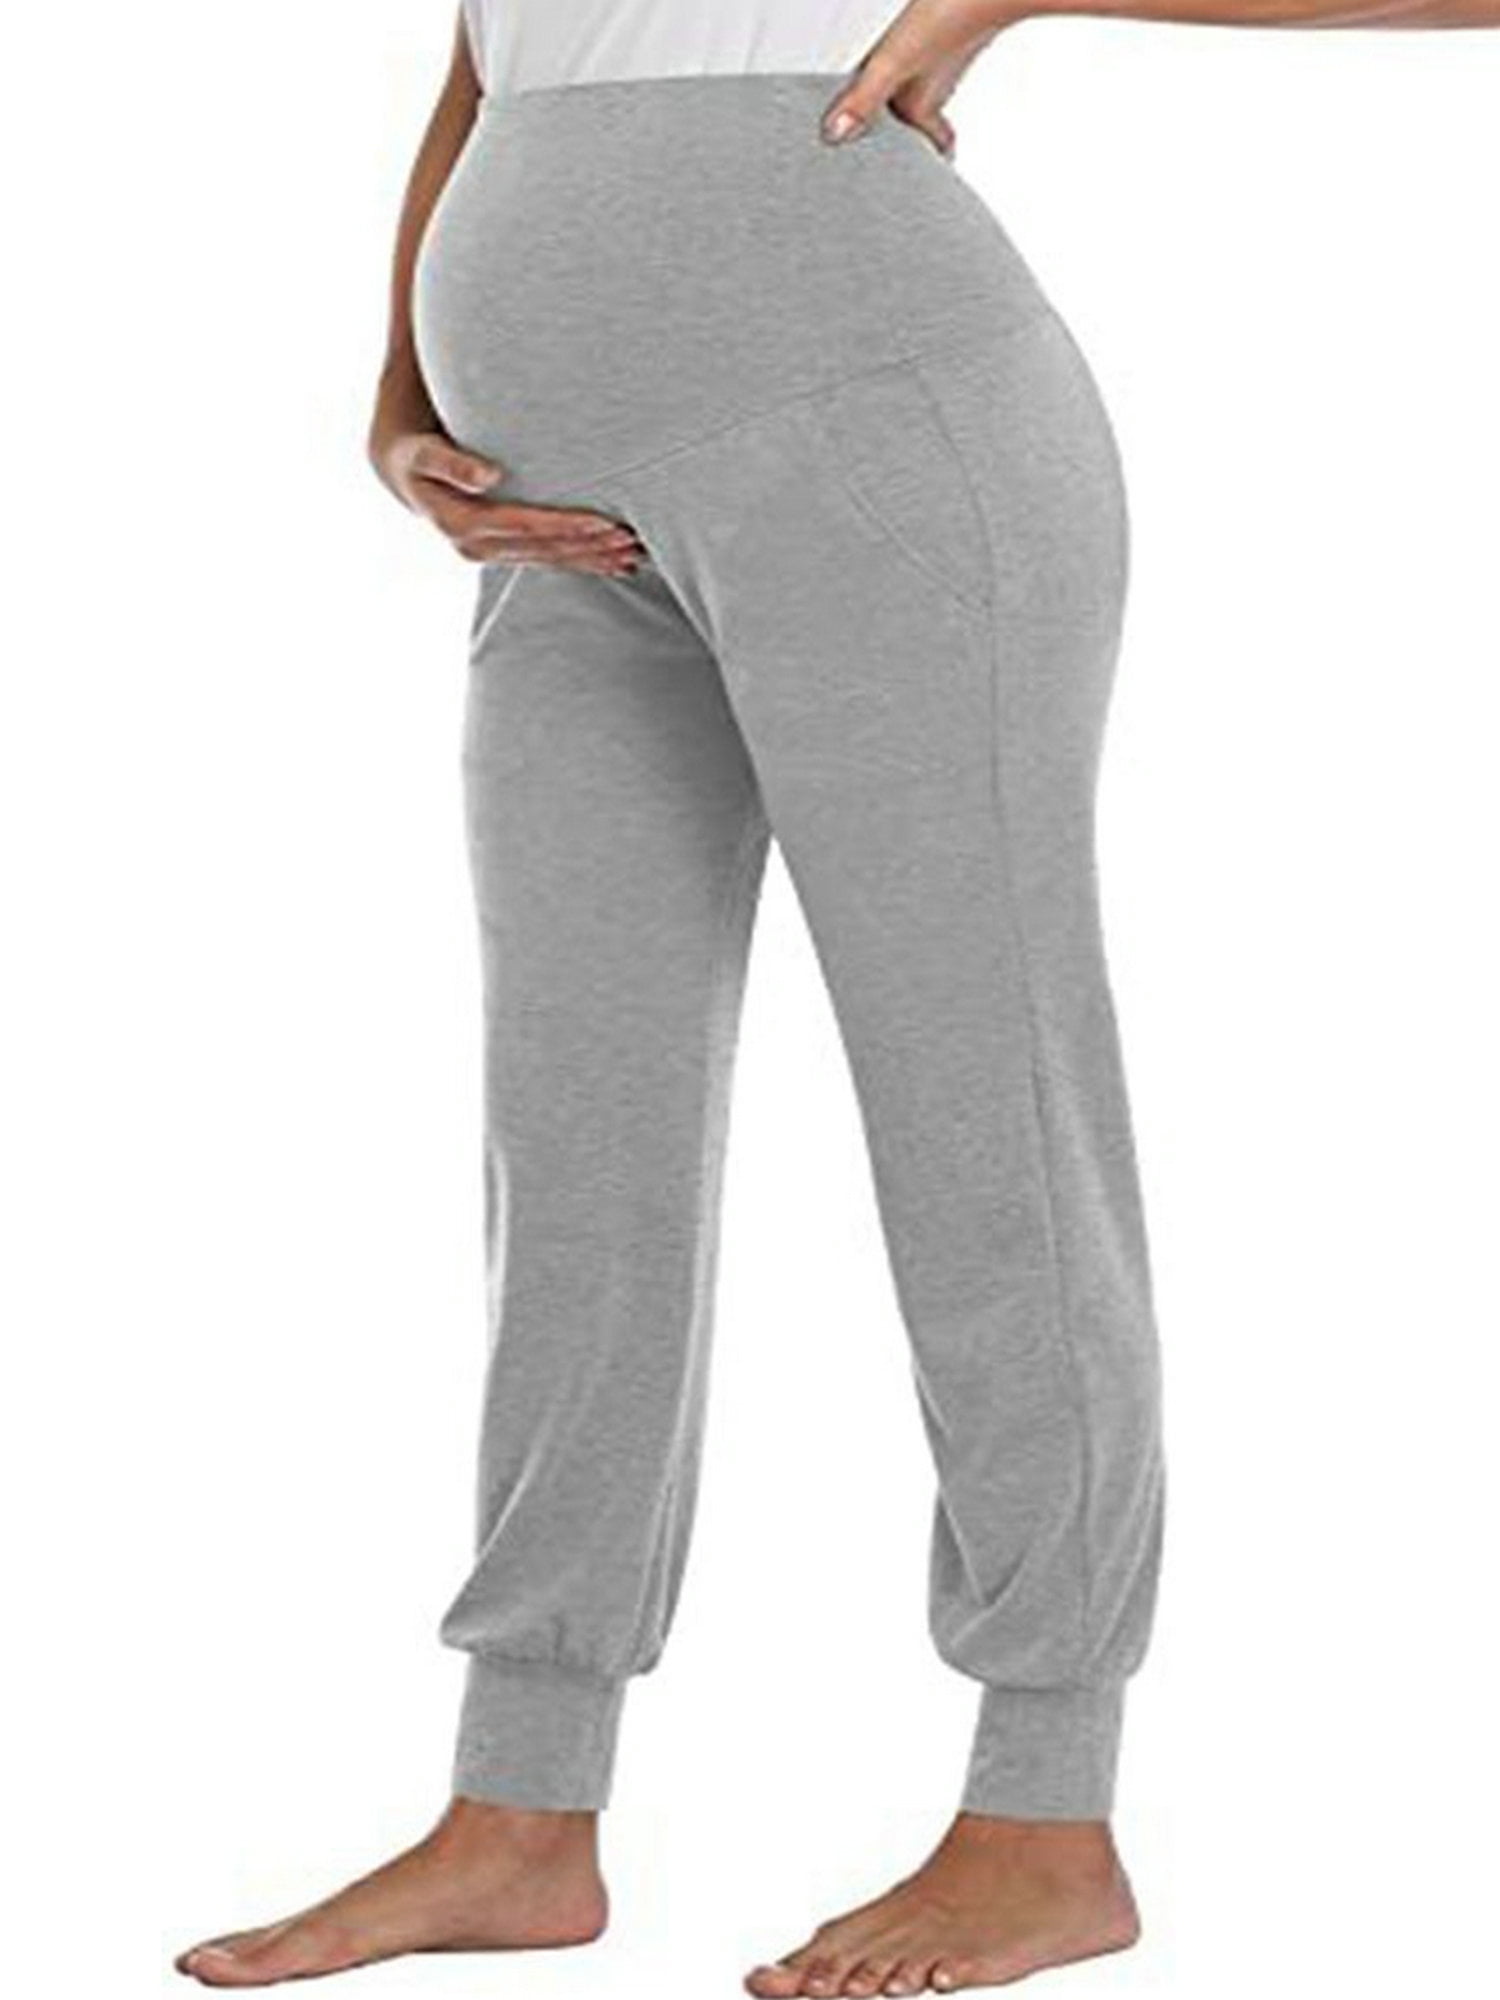 Zdcdcd Maternity Pregnant Women Casual Pants Over The Belly Trousers  Sweatpants